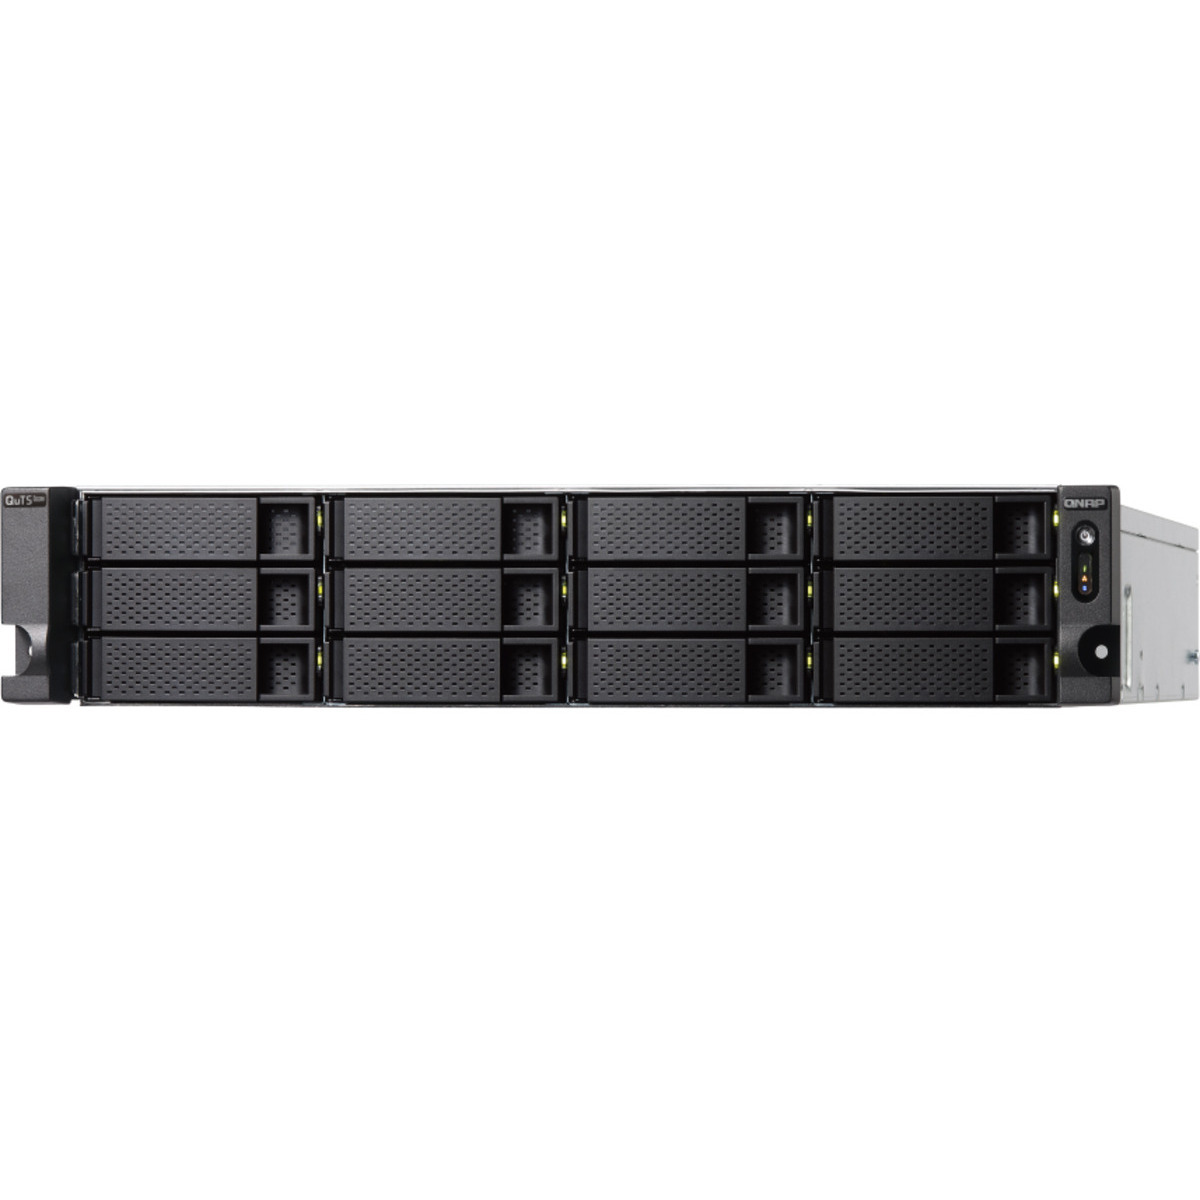 QNAP TS-h1886XU-RP R2 QuTS hero Edition 14tb 12+6-Bay RackMount Large Business / Enterprise NAS - Network Attached Storage Device 7x2tb Western Digital Red SA500 WDS200T1R0A 2.5 560/530MB/s SATA 6Gb/s SSD NAS Class Drives Installed - Burn-In Tested TS-h1886XU-RP R2 QuTS hero Edition